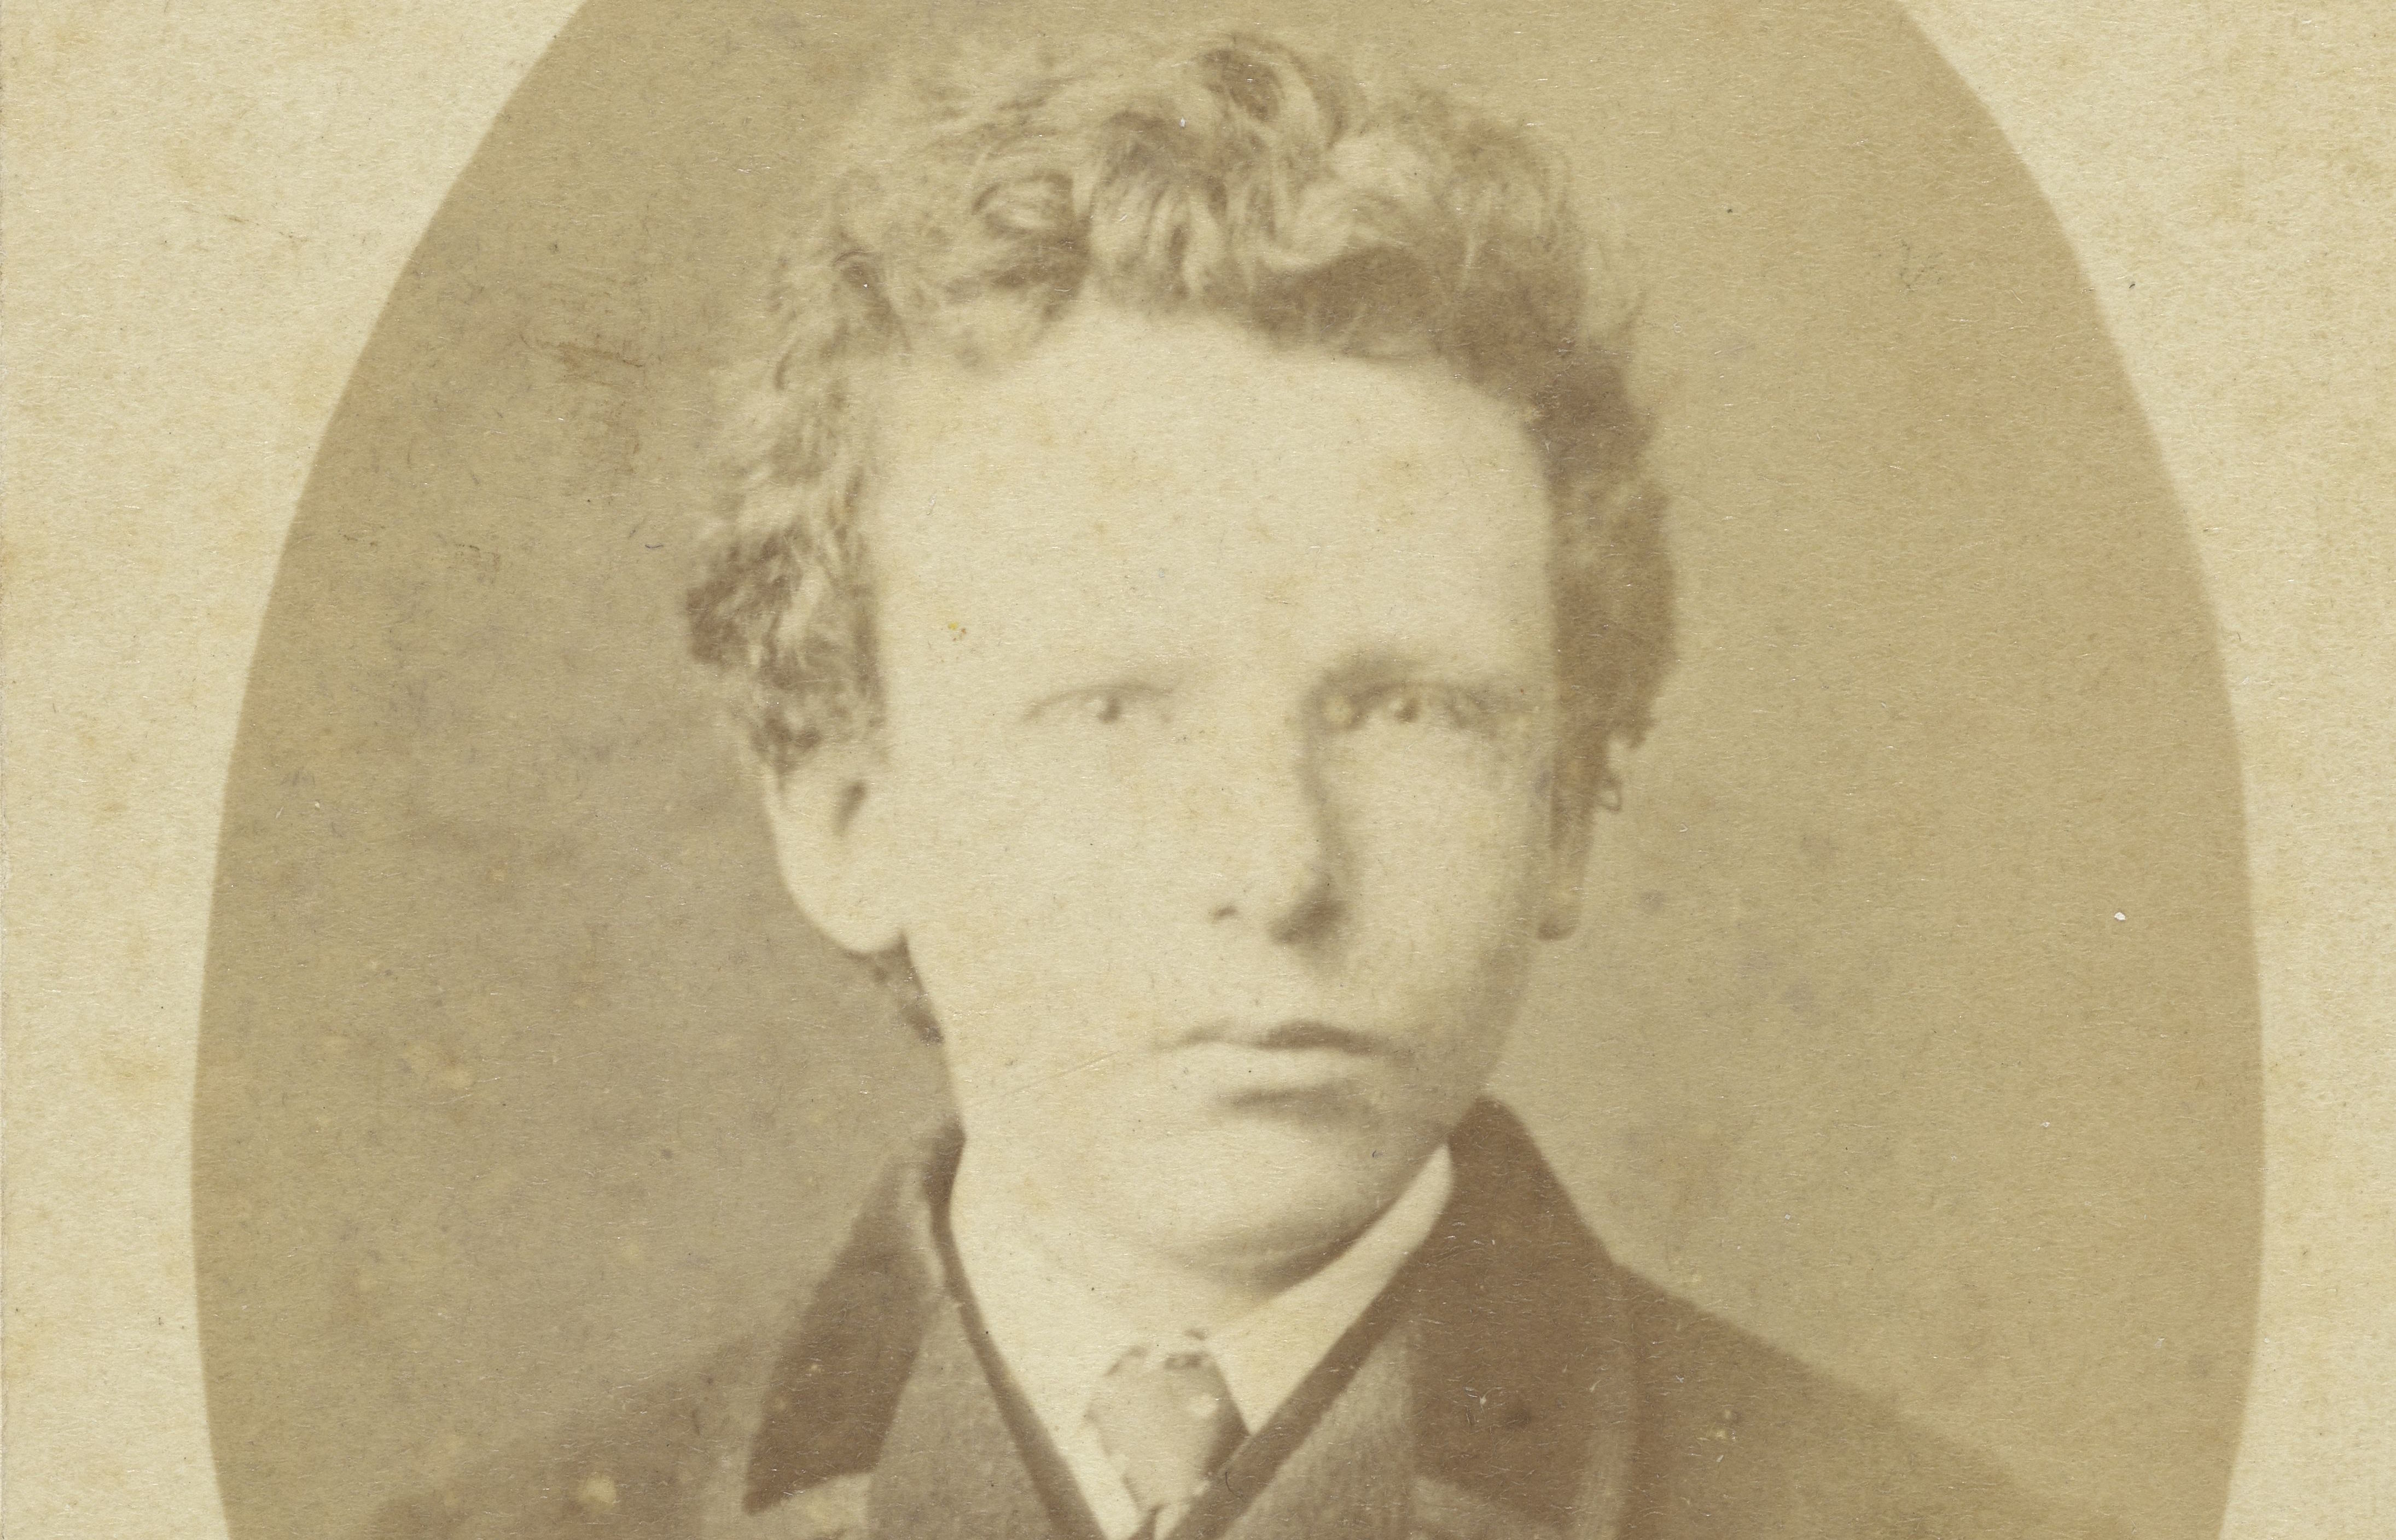 This handout made available by the Van Gogh Museum, Amsterdam, on Thursday Nov. 29, 2018, shows an image of 15 year old Theo van Gogh, originally thought to be of his brother Vincent van Gogh. One of only two known photos of Vincent van Gogh turns out to most likely be an image of his brother, Theo, the Van Gogh Museum announced Thursday. (Van Gogh Museum via AP)